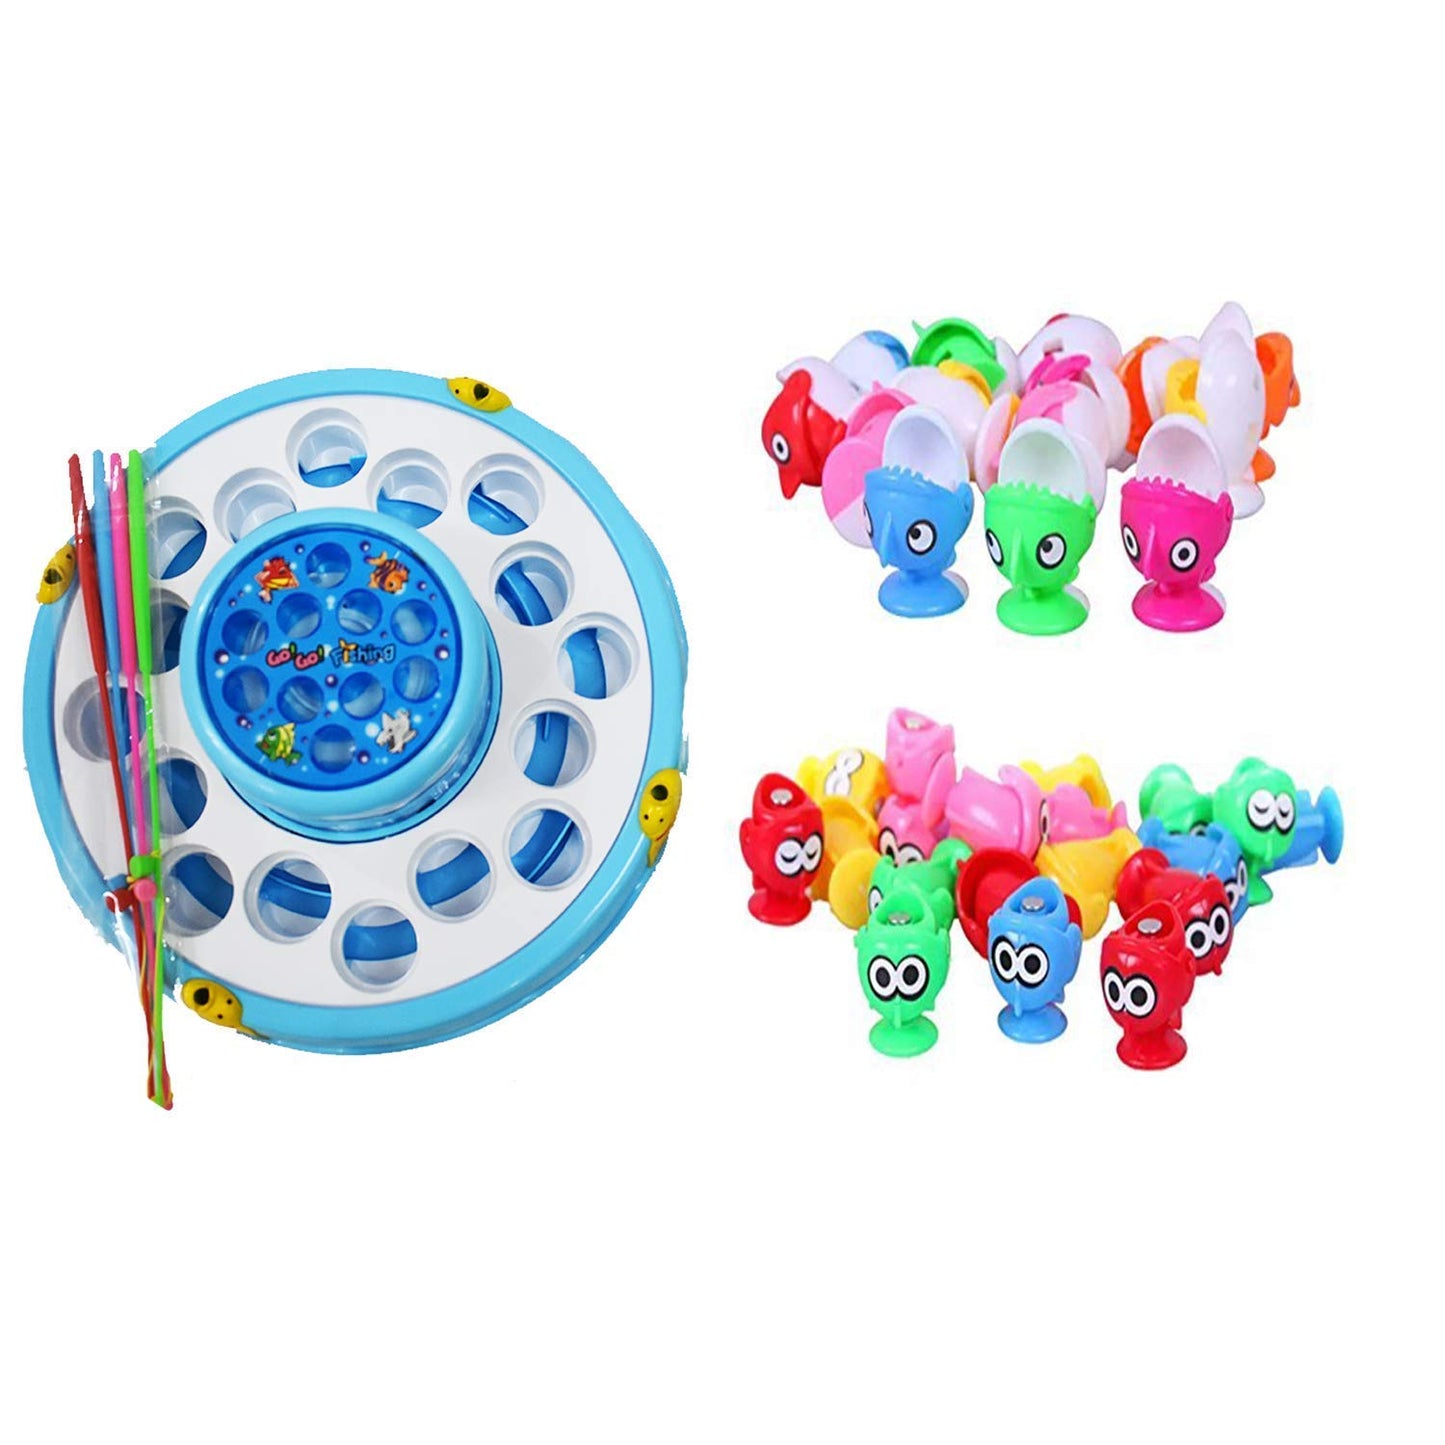 Fishing Game Toys, Fish Toys For Kids Fishing Catching Game With 26 Fishes, 2 Rotary Fish Pond And 4 Pods